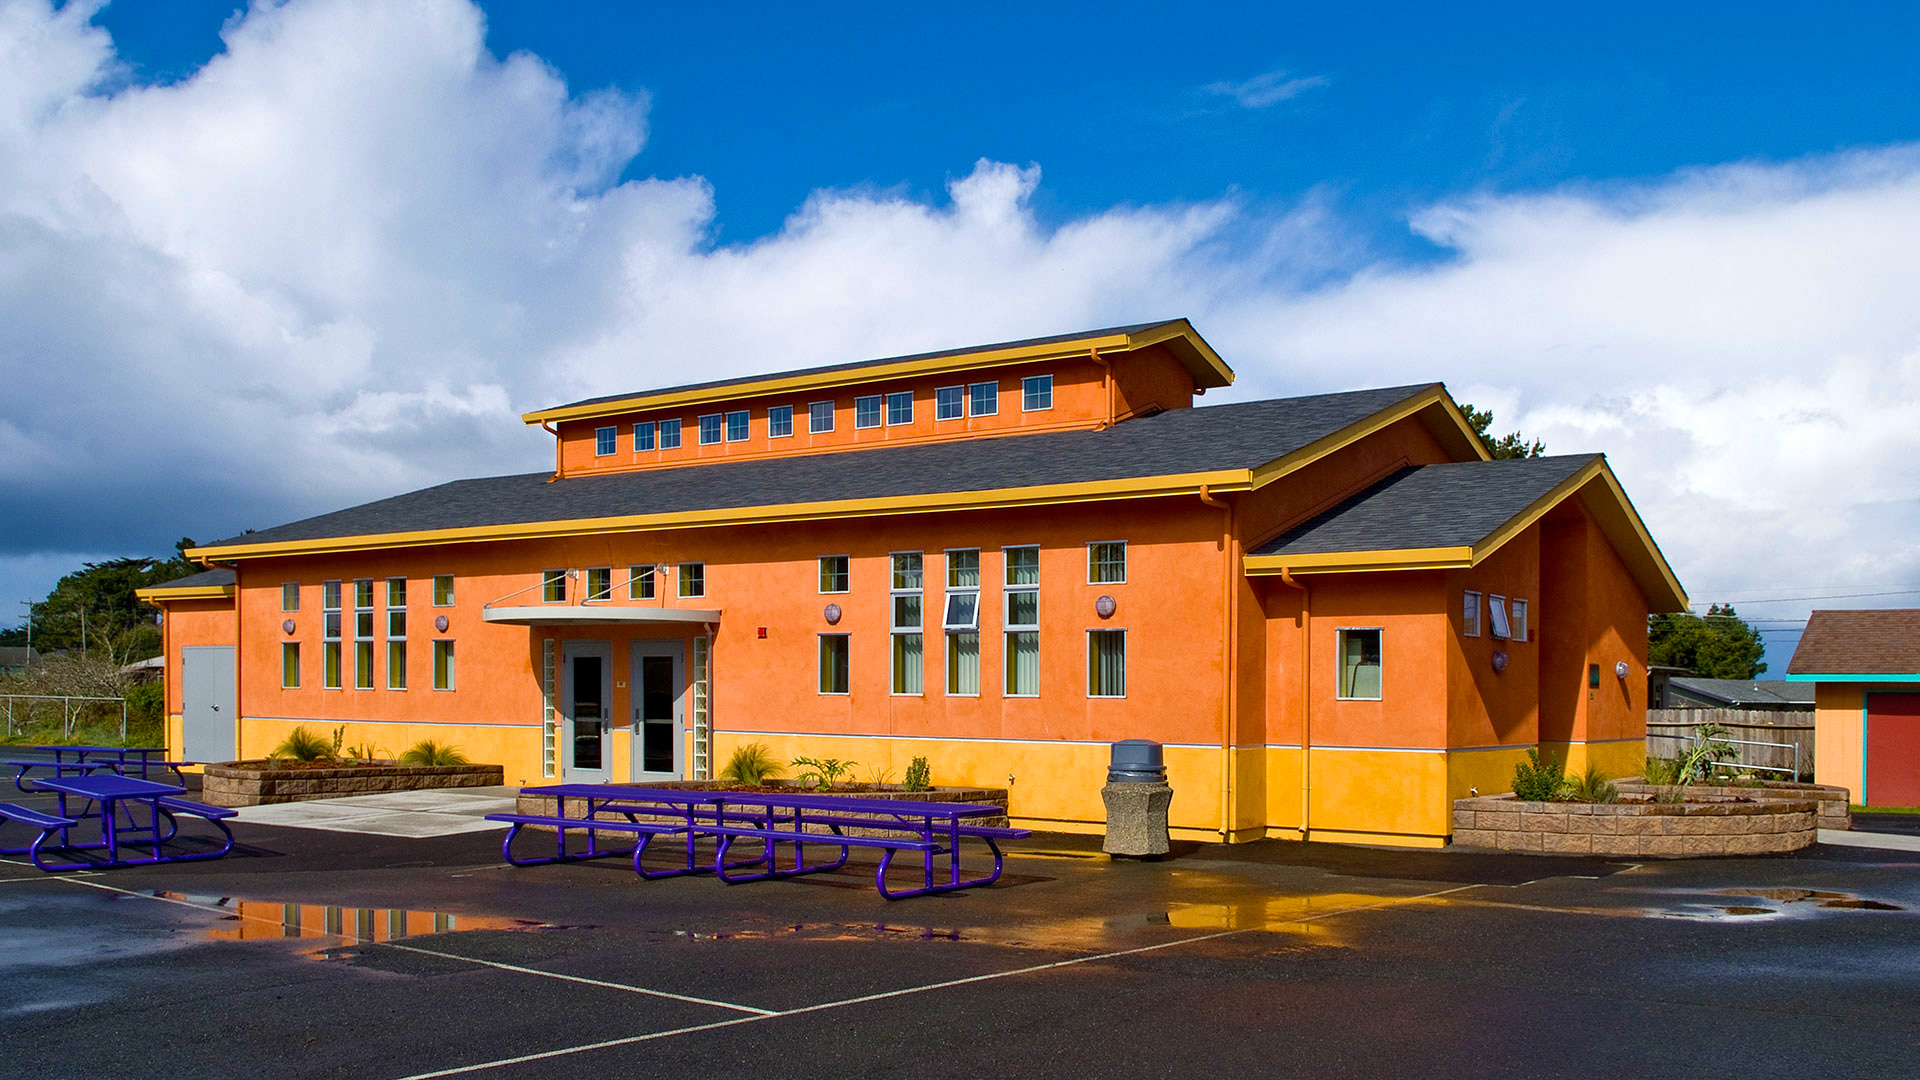 Exterior of completed cafeteria. showing asphalt and purple lunch tables, clouds and blue sky above.